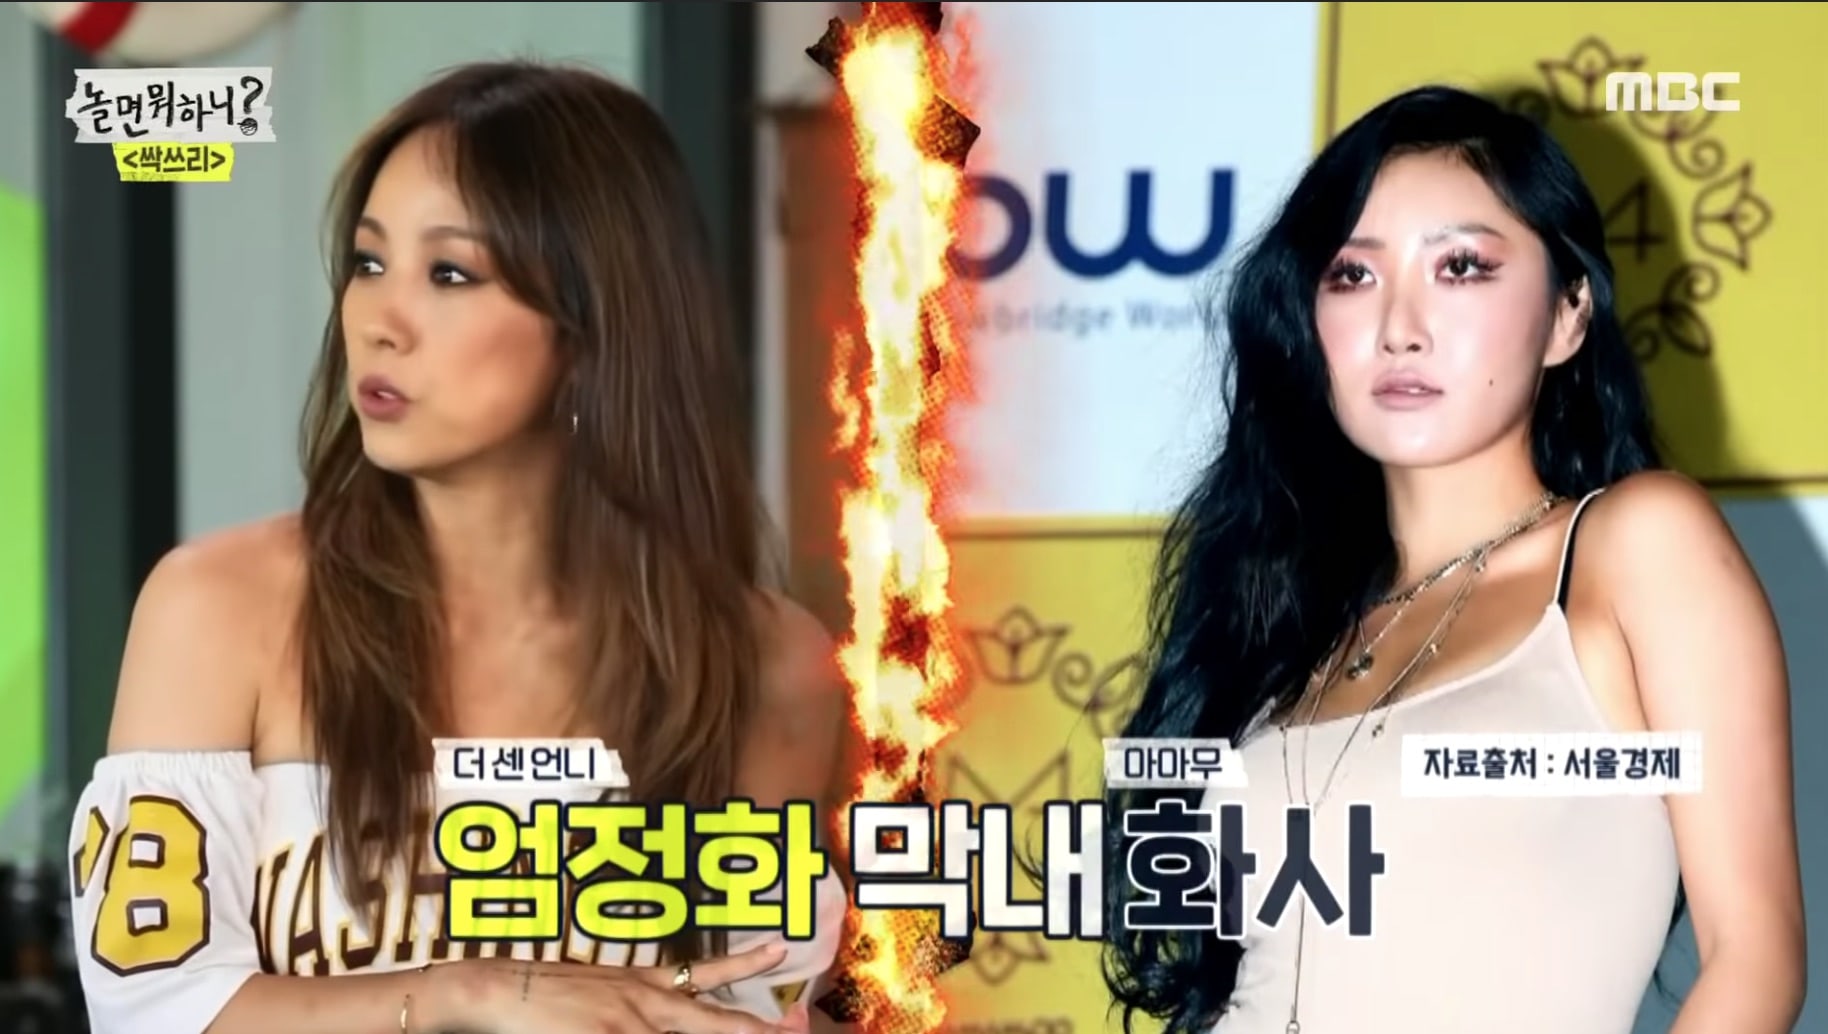 lee-hyori-reveals-girl-group-lineup-in-her-dream-4